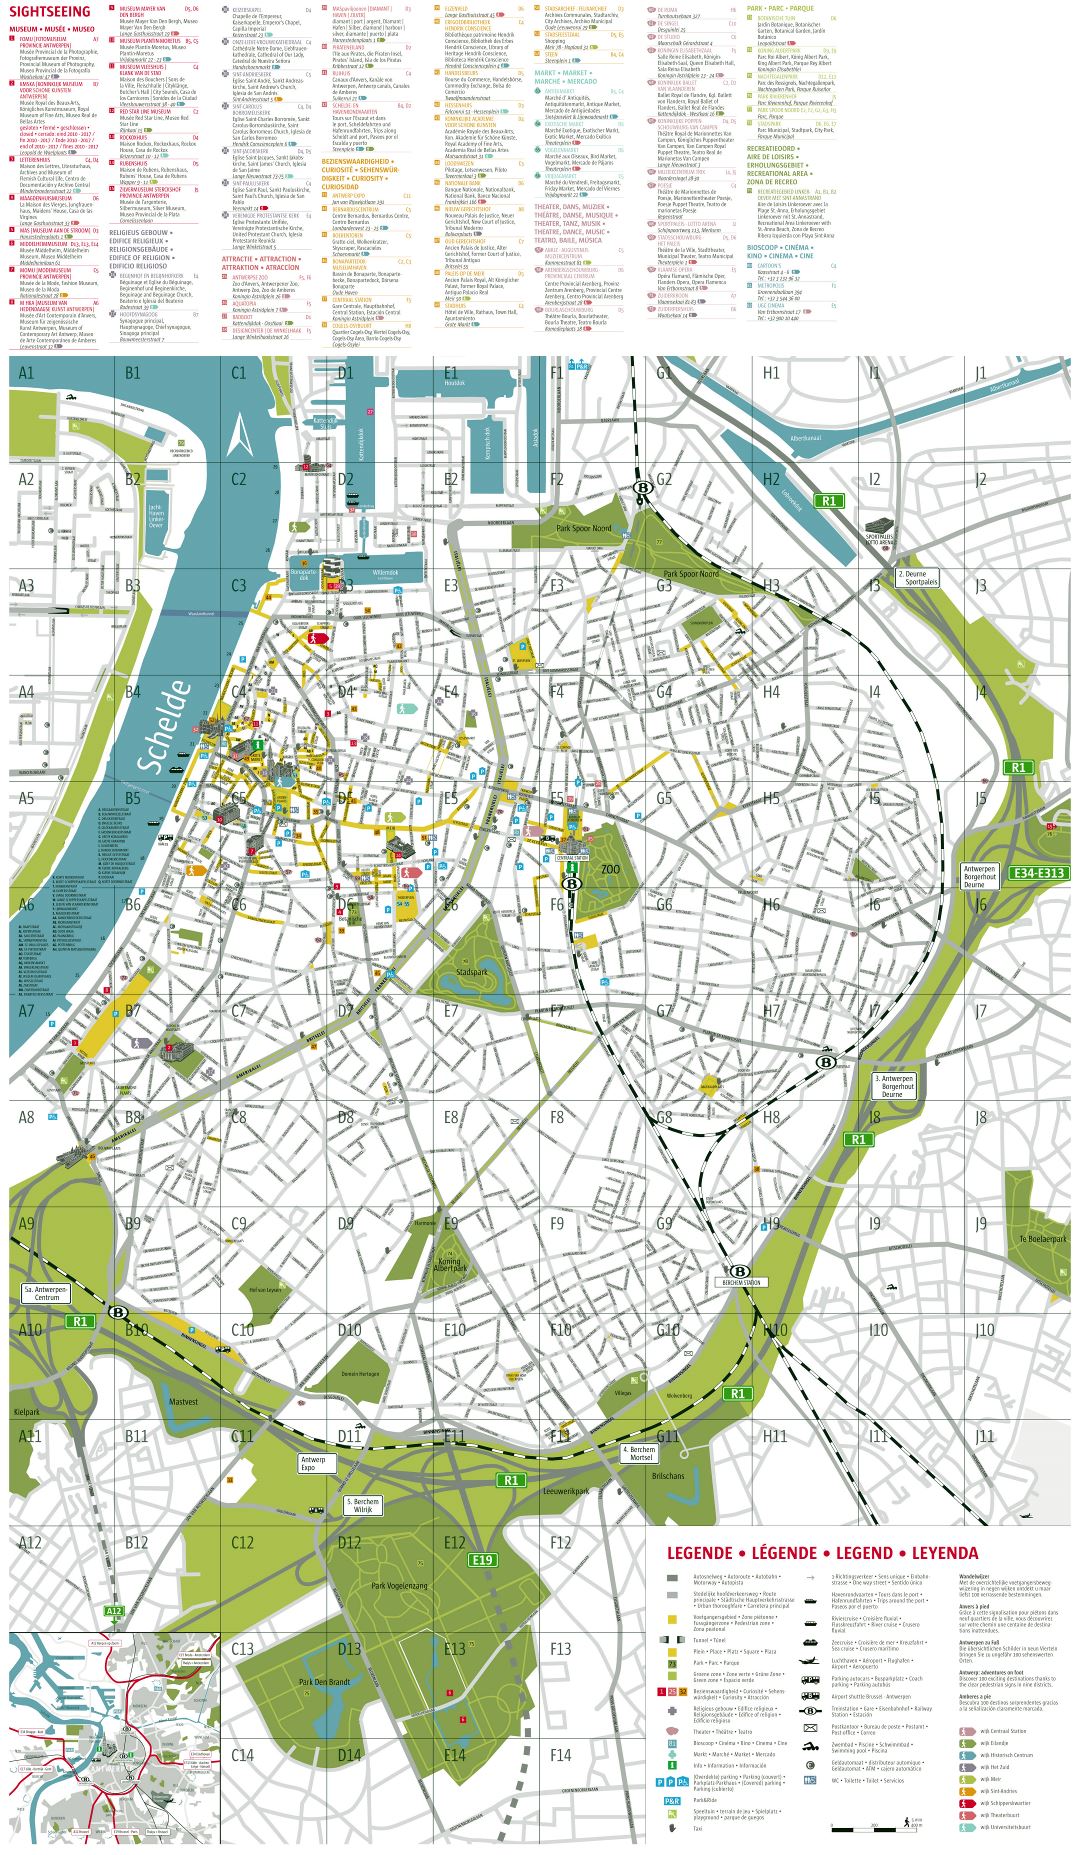 Large scale detailed tourist map of Antwerpen city